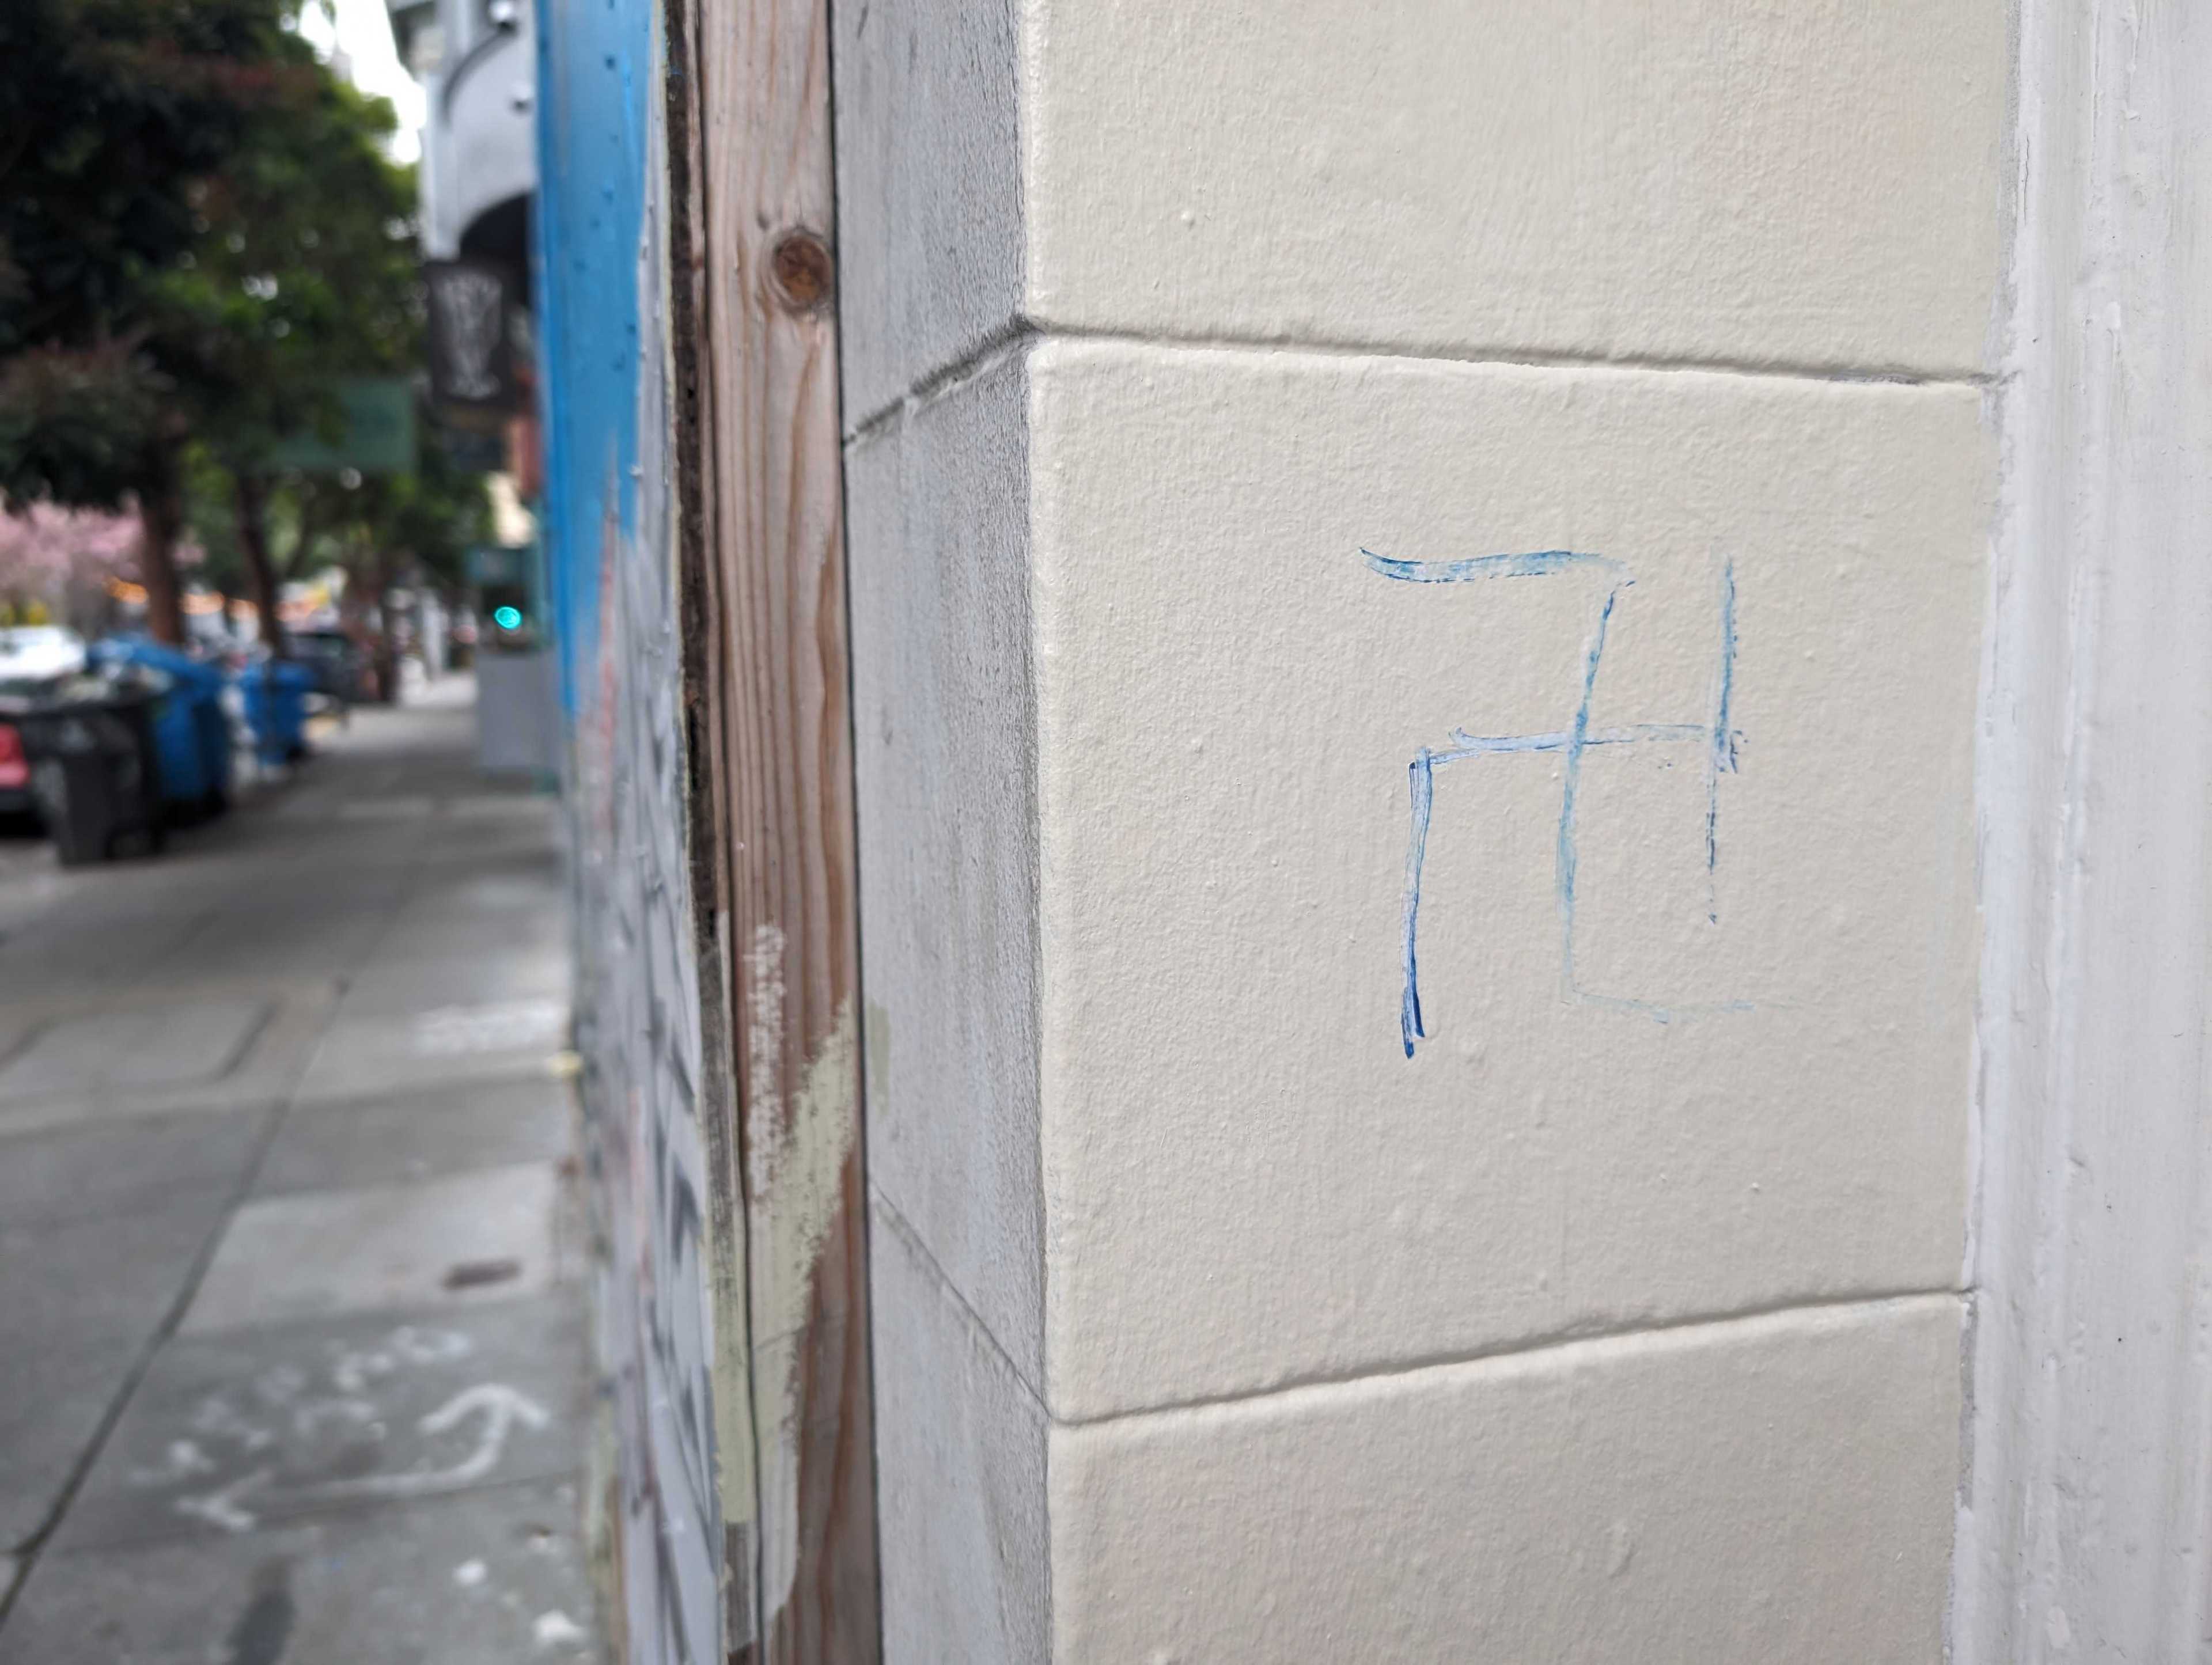 Swastika on wall in Noe Valley